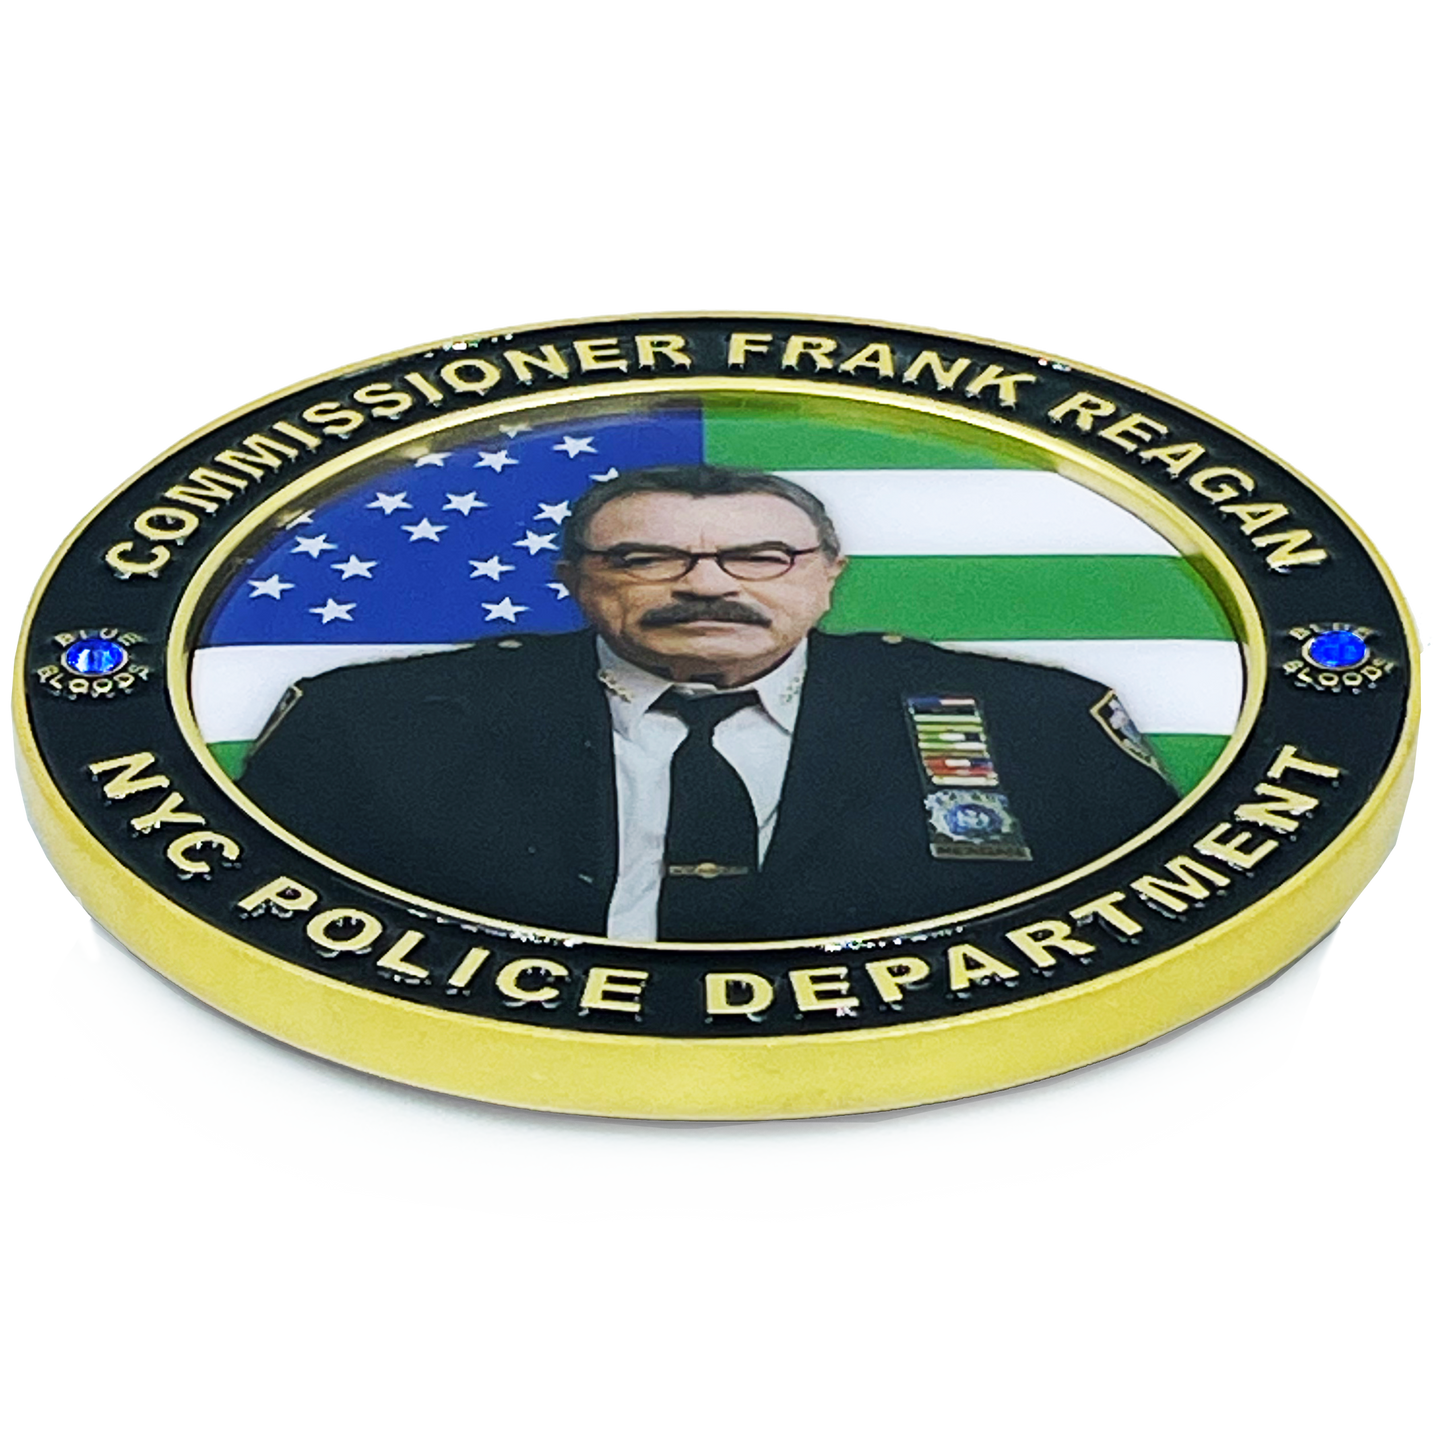 BL2-003A Blue Bloods NYPD Commissioner Frank Reagan Police Officer Tom Selleck Challenge Coin